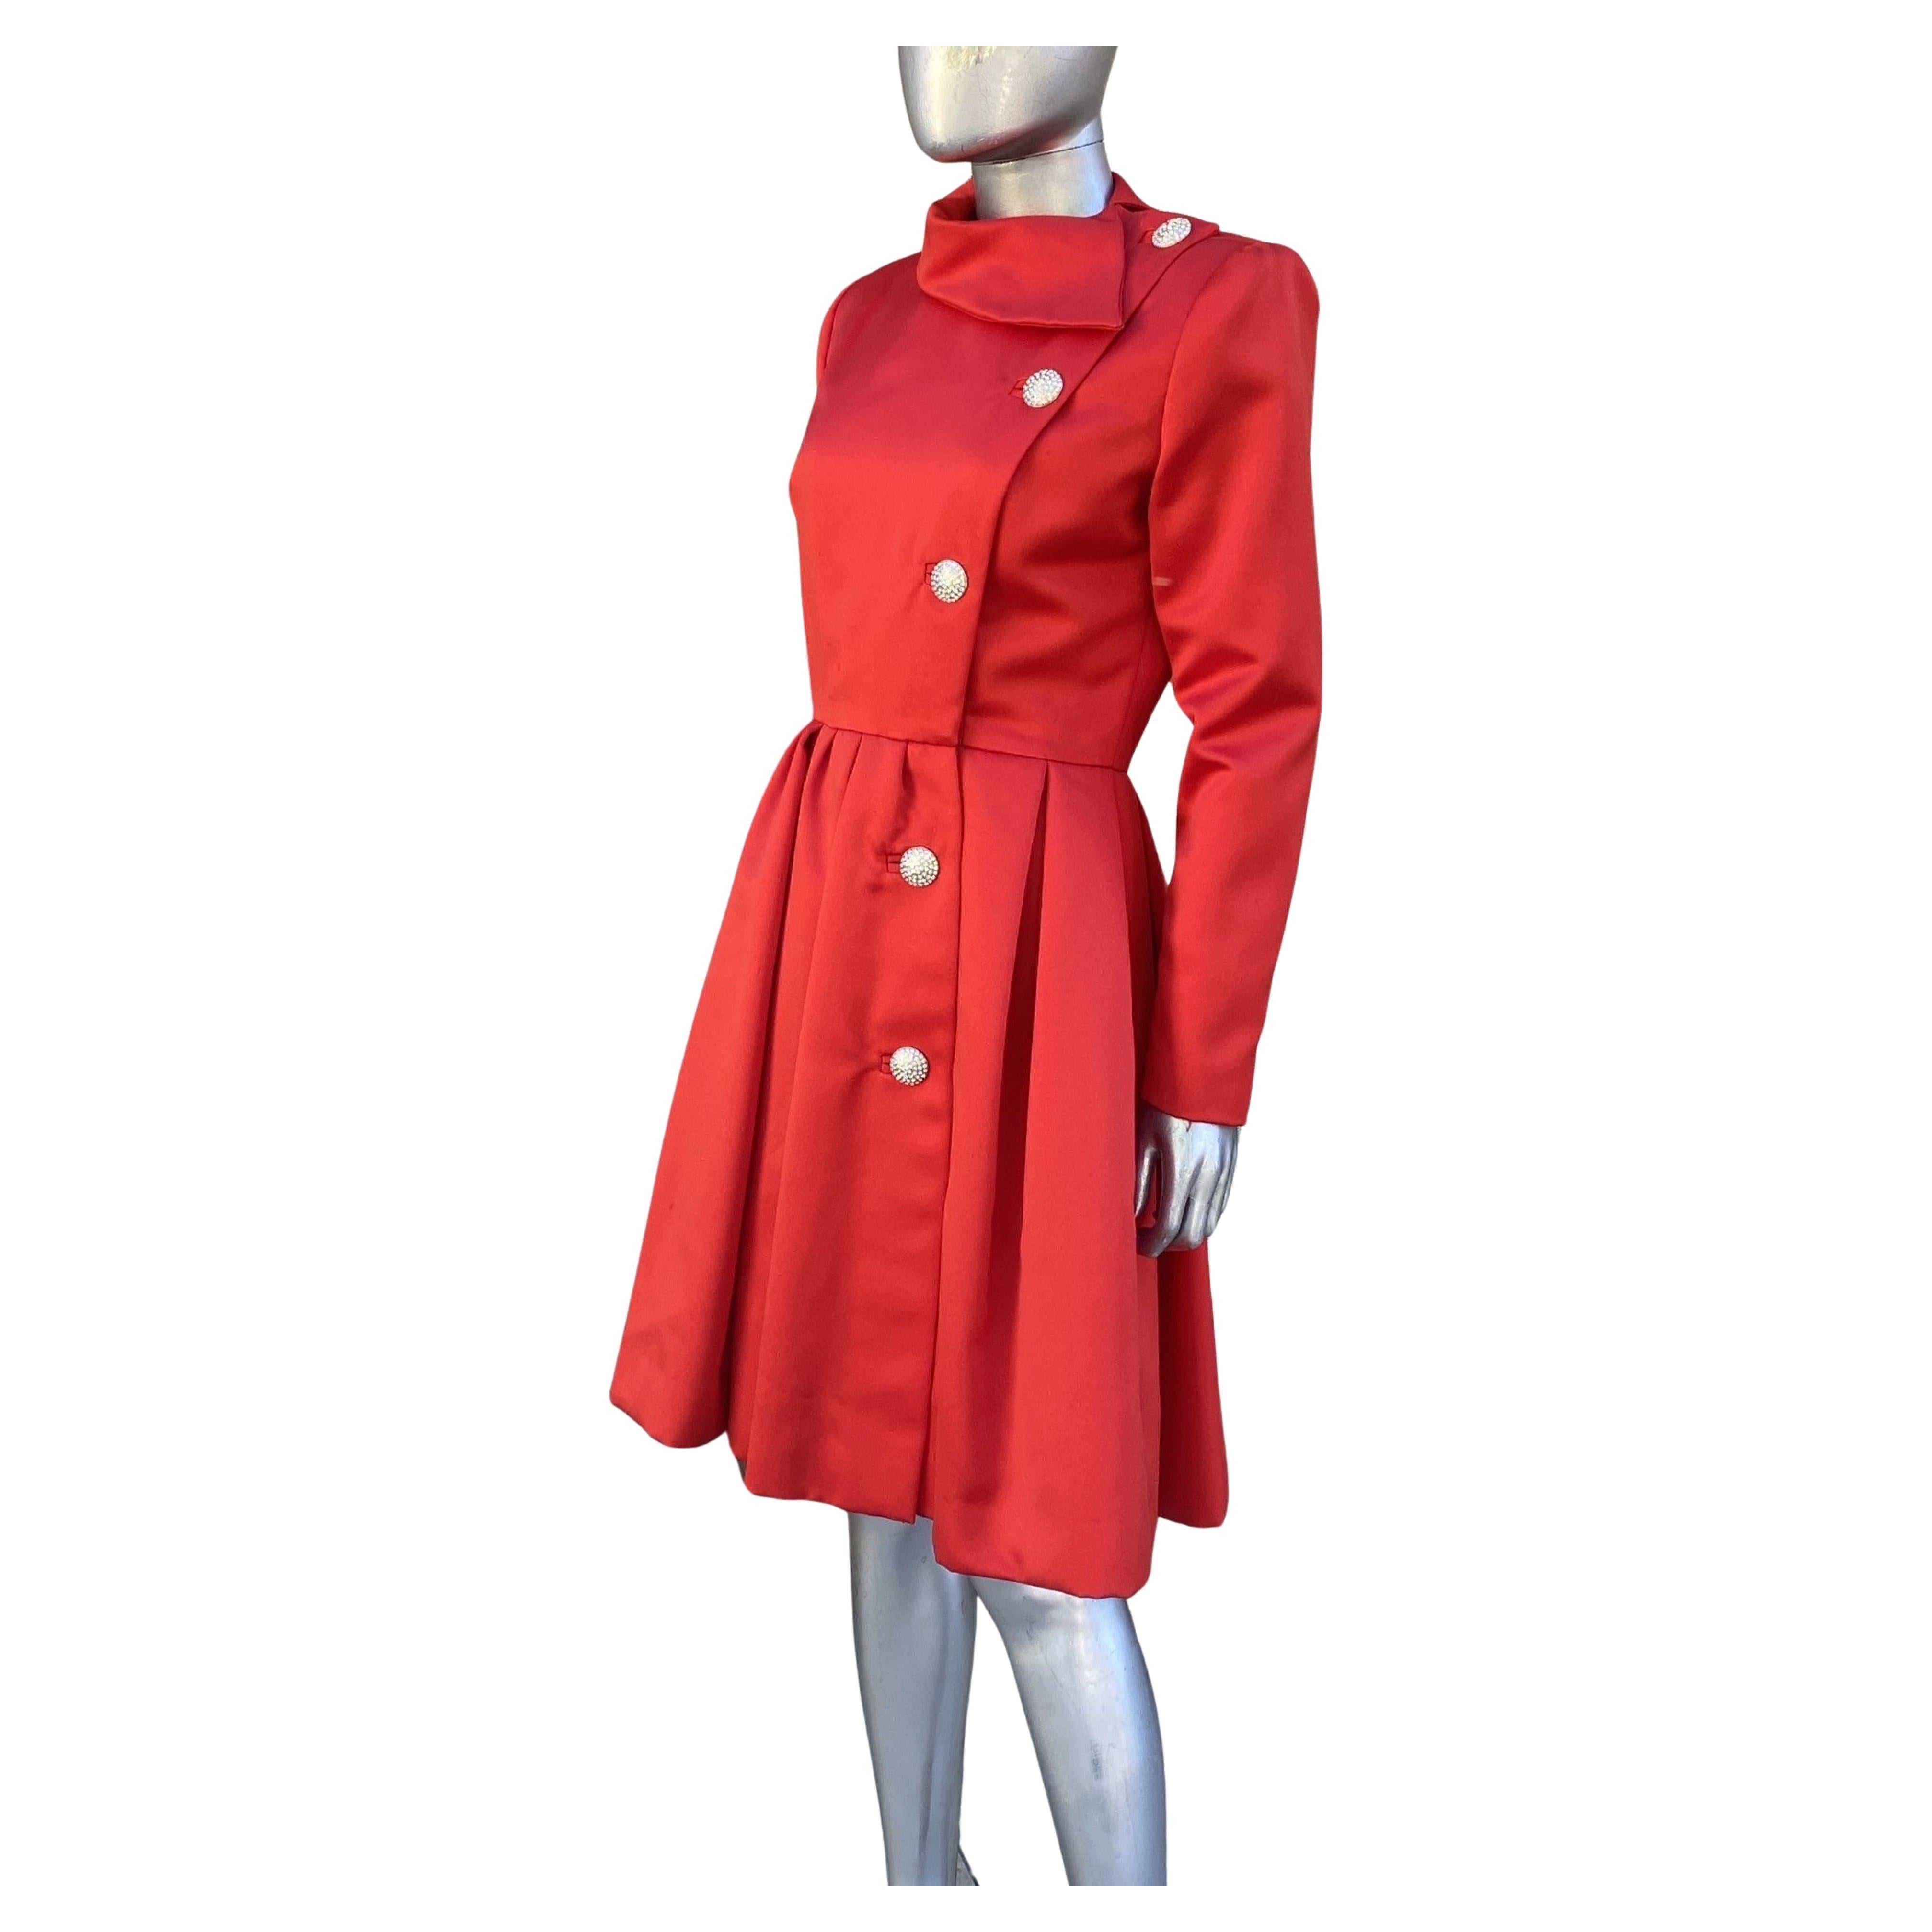 Women's Red Satin and Rhinestone Button Coat Dress by Victor Costa Neiman Marcus Size 8 For Sale